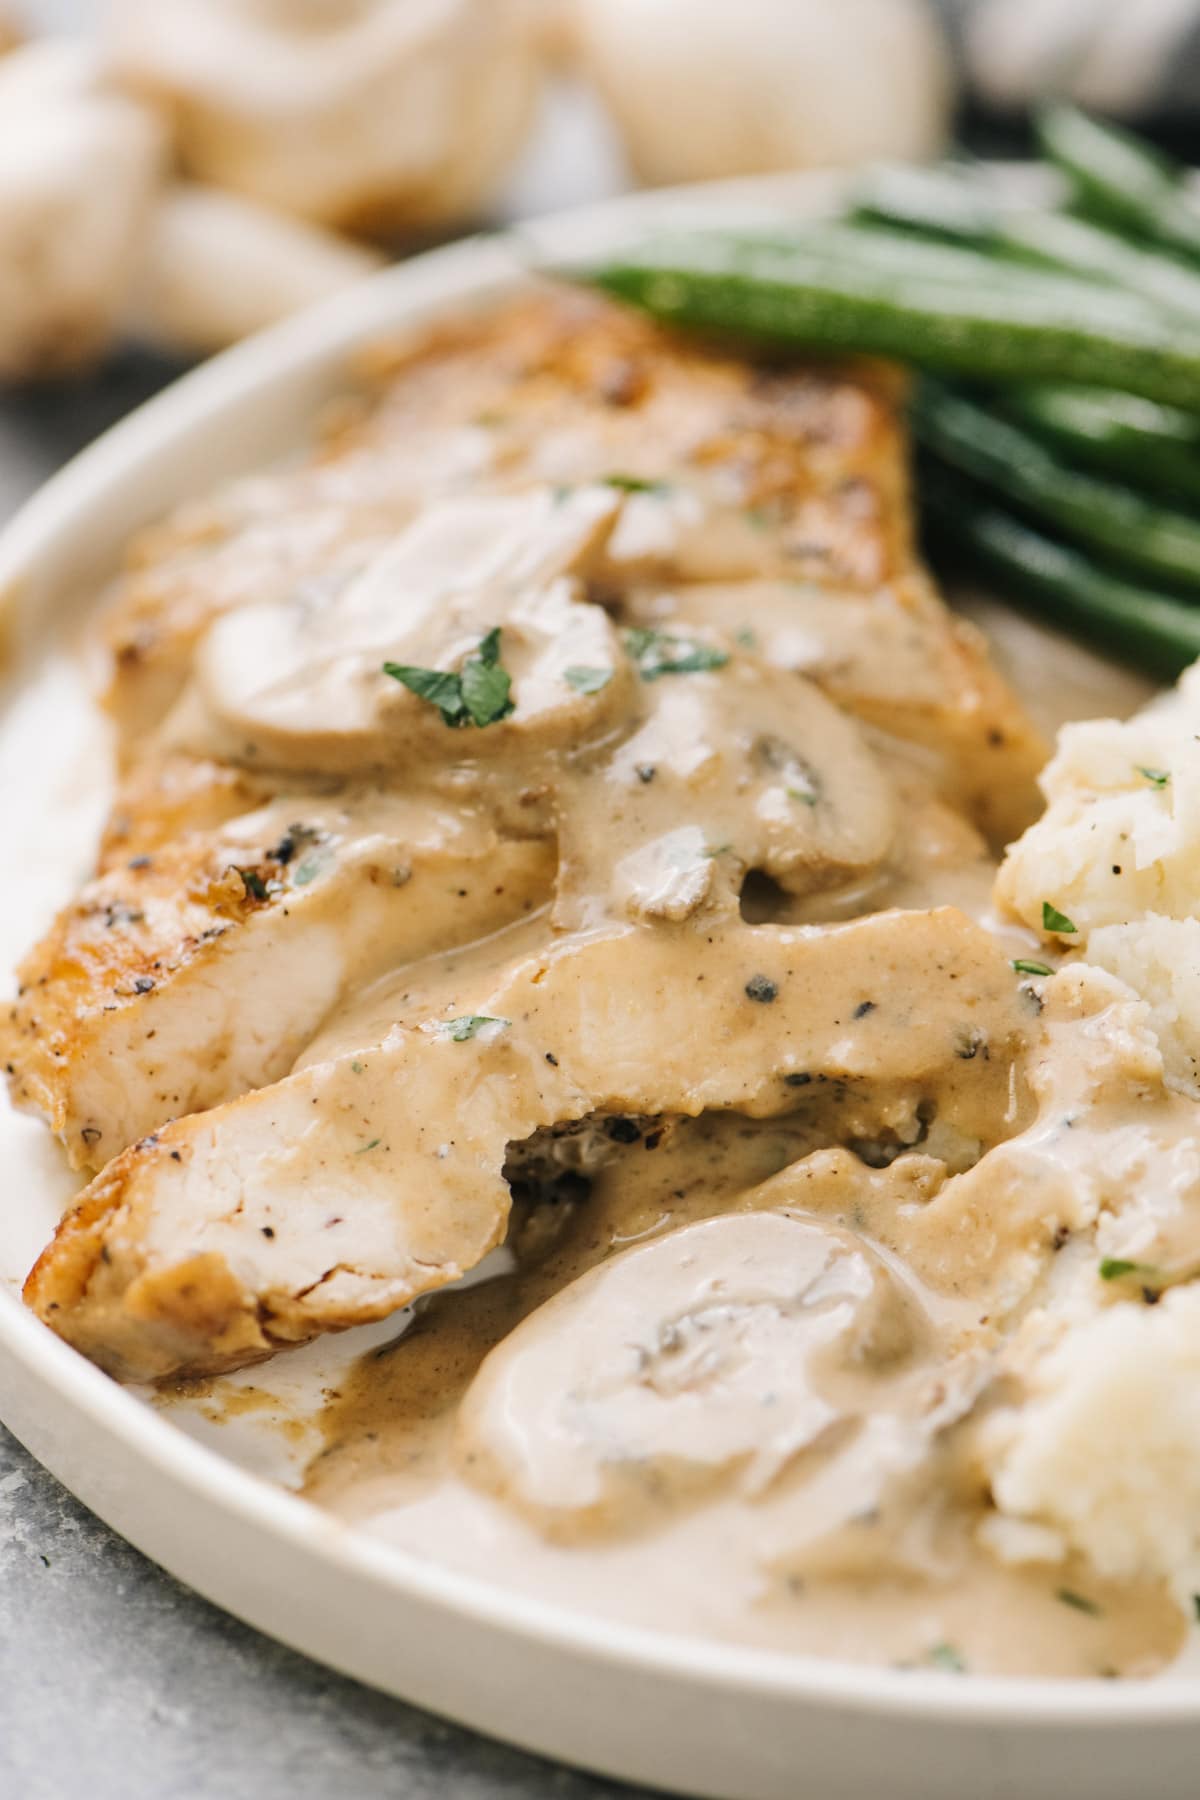 Sliced chicken with creamy mushroom sauce on a cream plate with mashed potatoes and green beans.